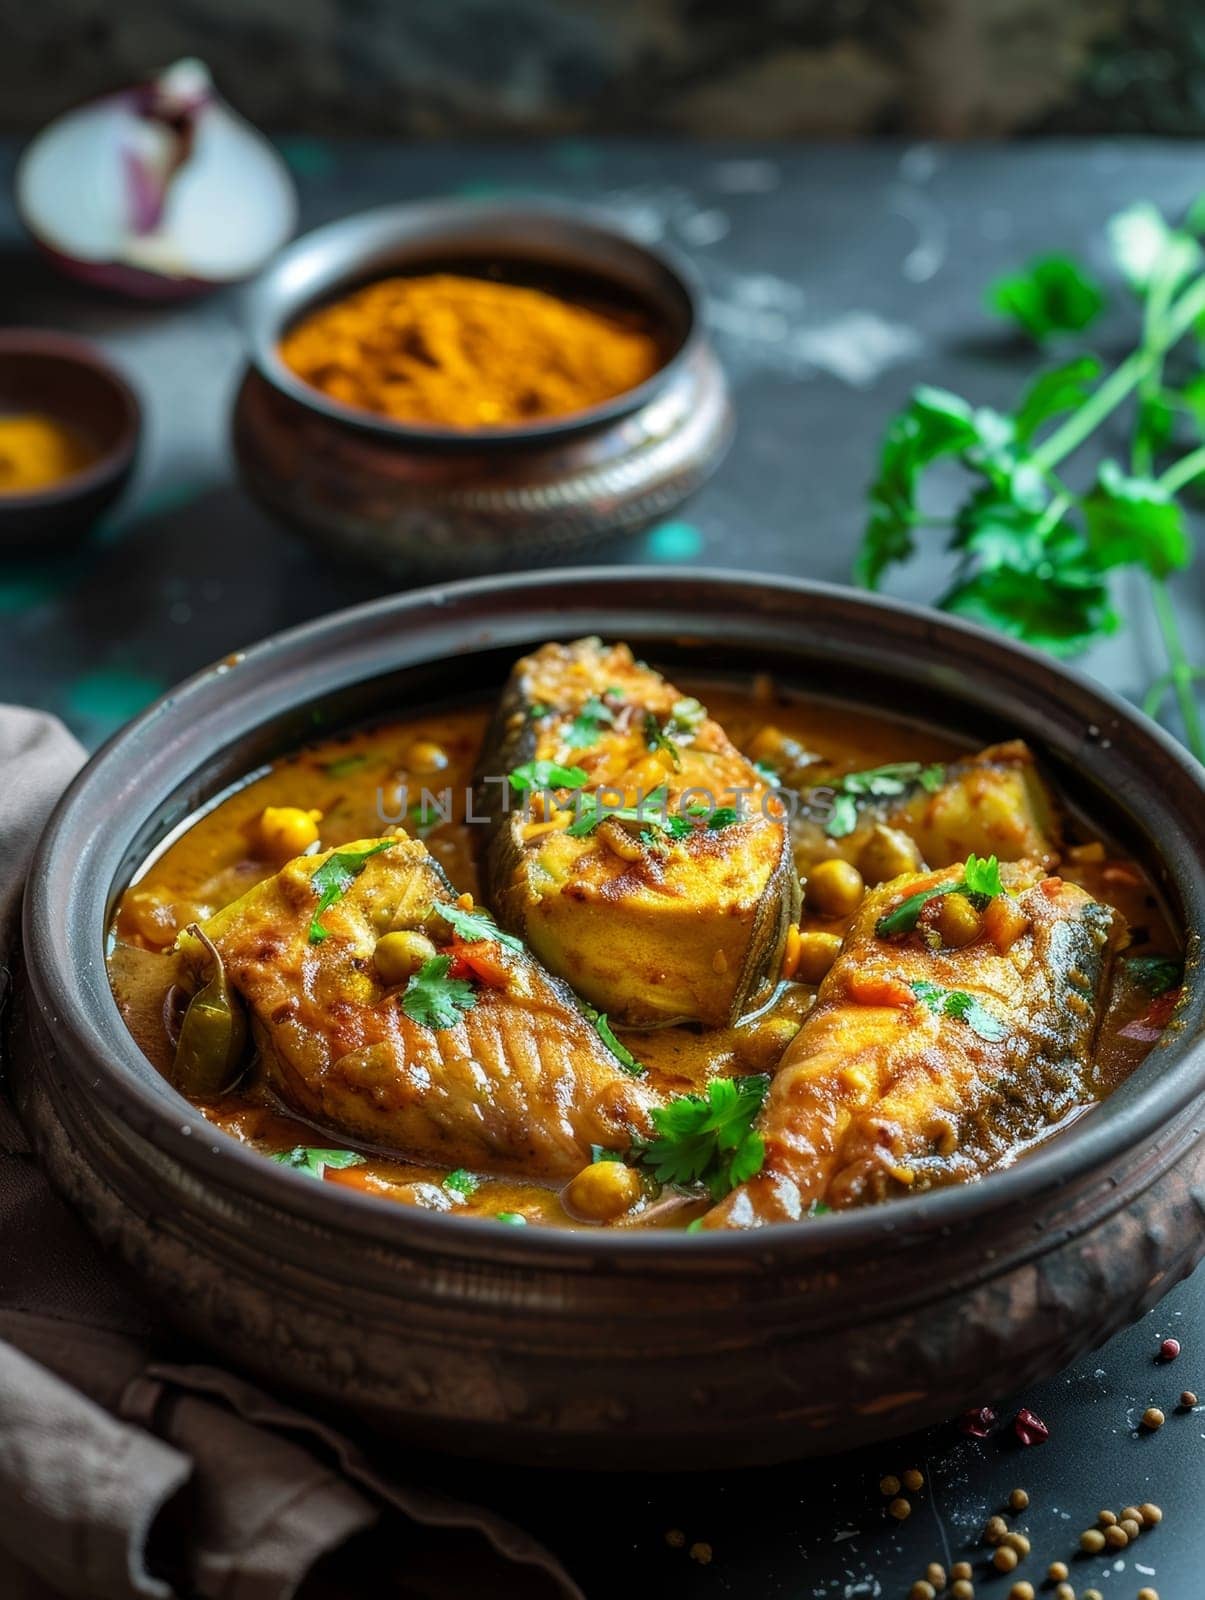 Aromatic Bangladeshi Hilsa fish curry served in a traditional bowl, seasoned with vibrant turmeric and flavorful mustard seeds. A delightful representation of South Asian cuisine. by sfinks